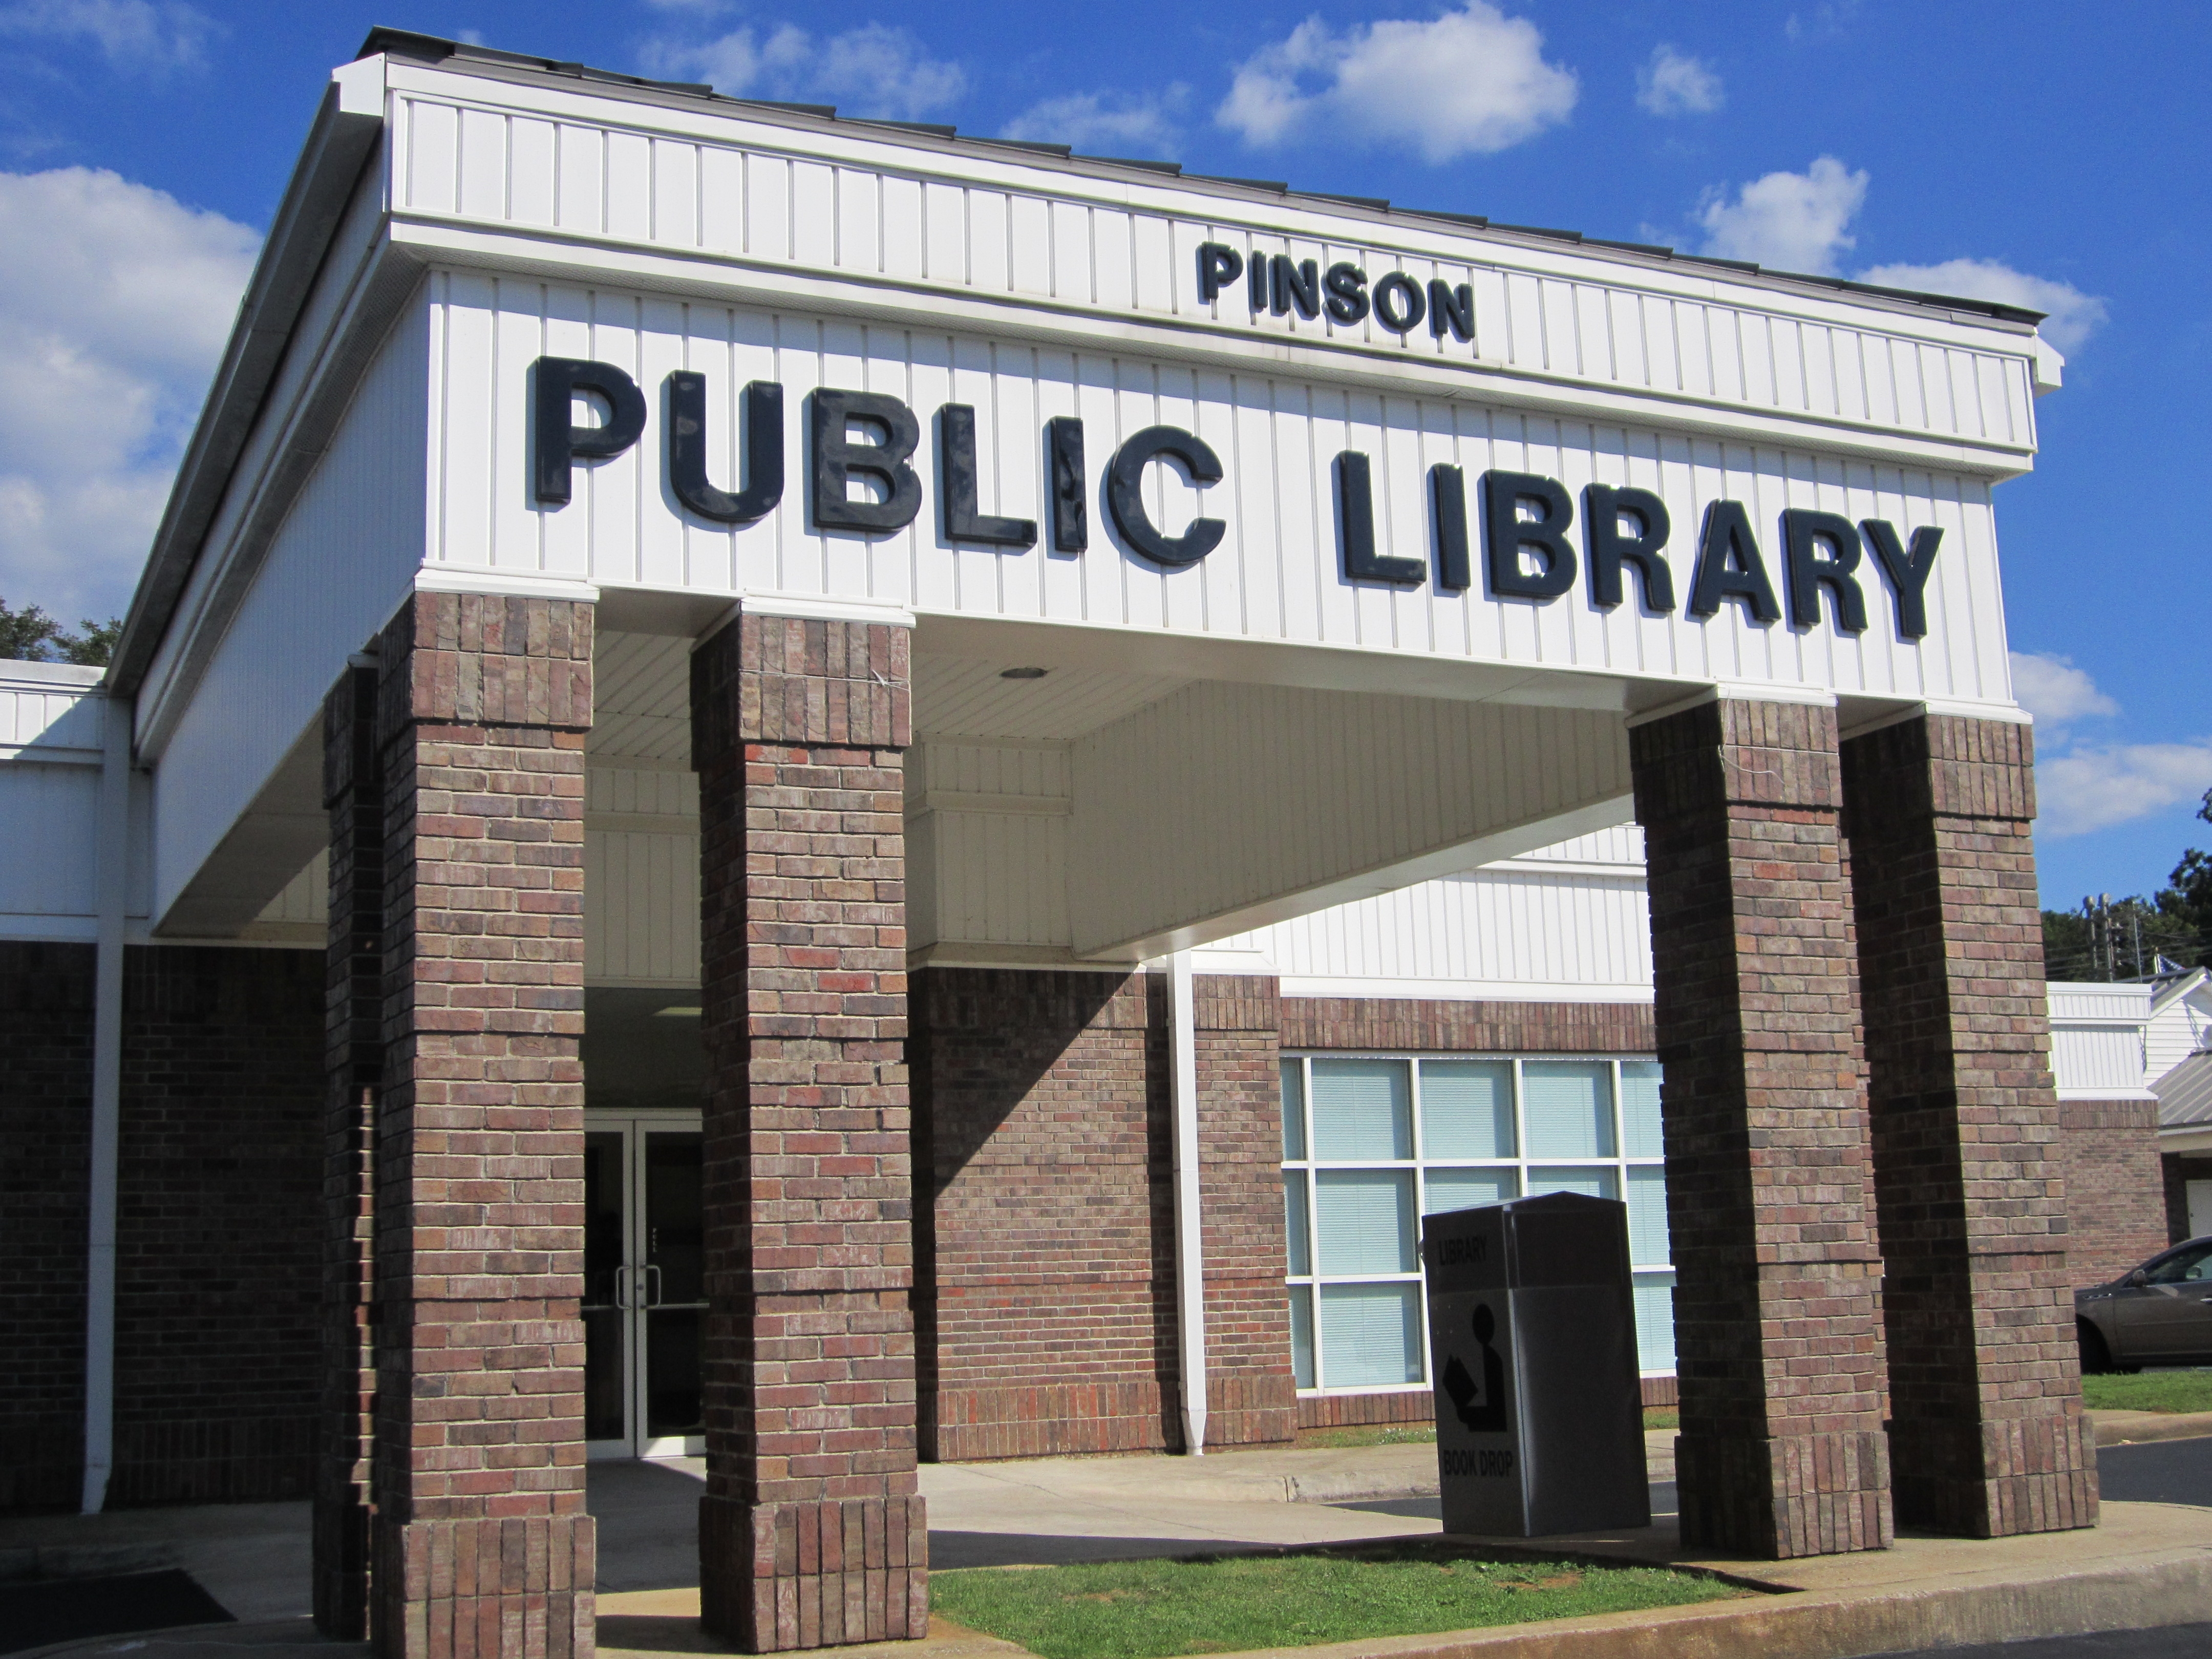 Pinson Public Library hosting community events for August